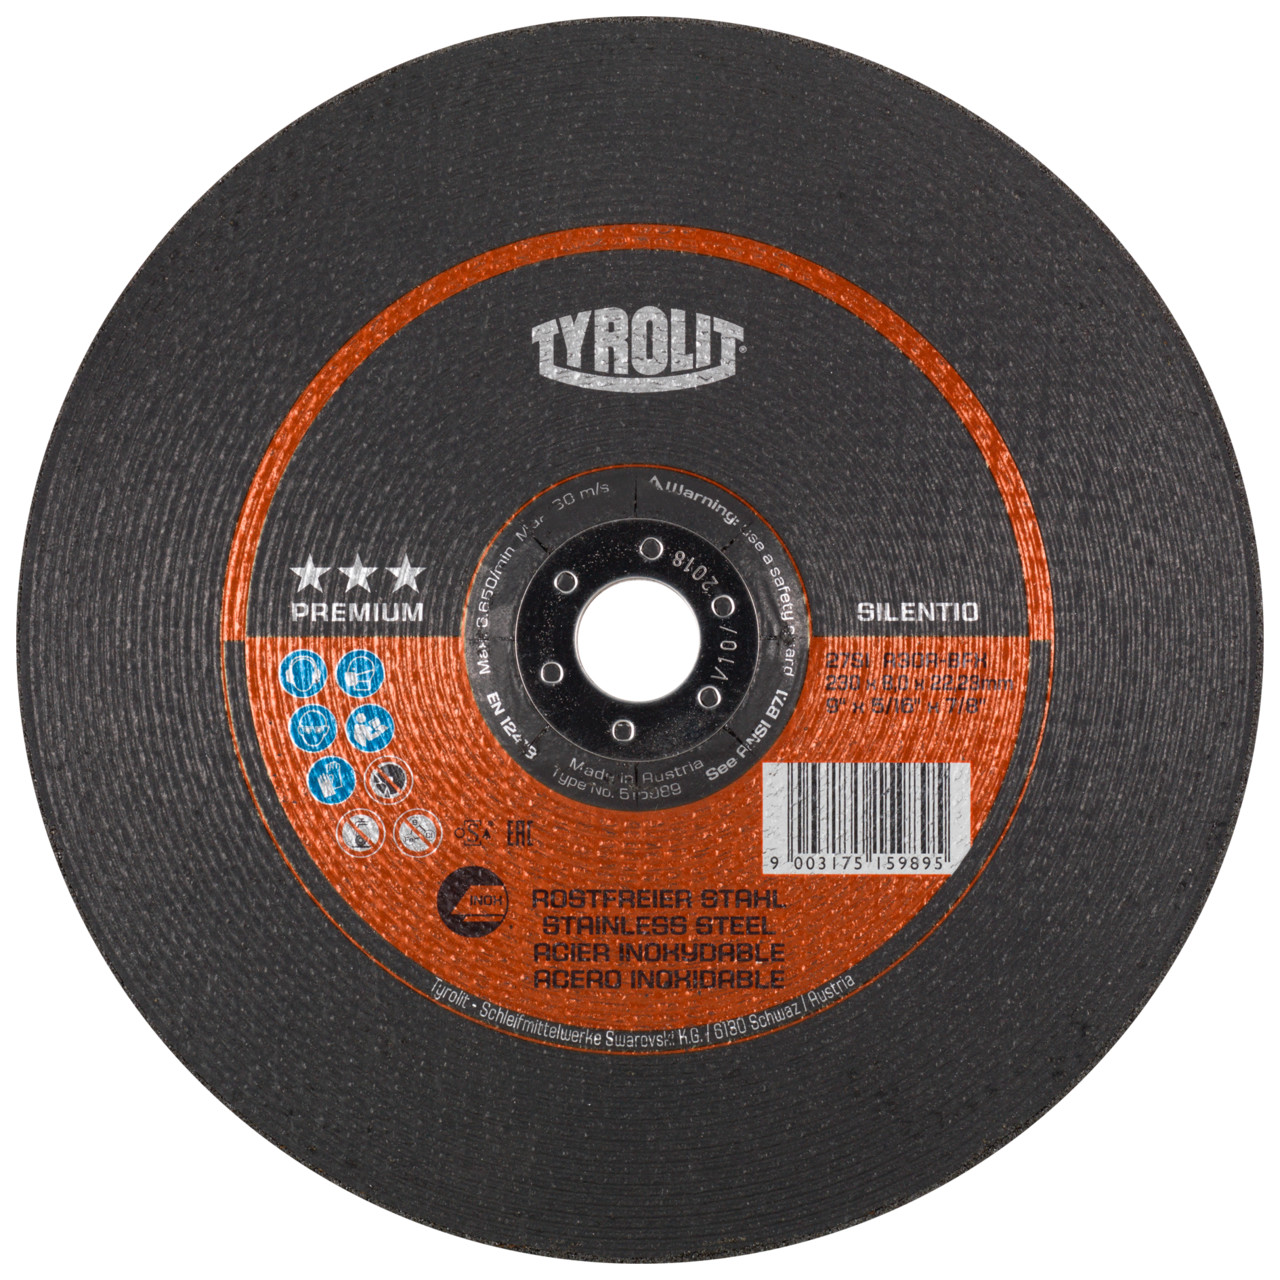 TYROLIT grinding wheel DxUxH 230x8x22.23 Silentio for stainless steel, shape: 27 - offset version, Art. 515989